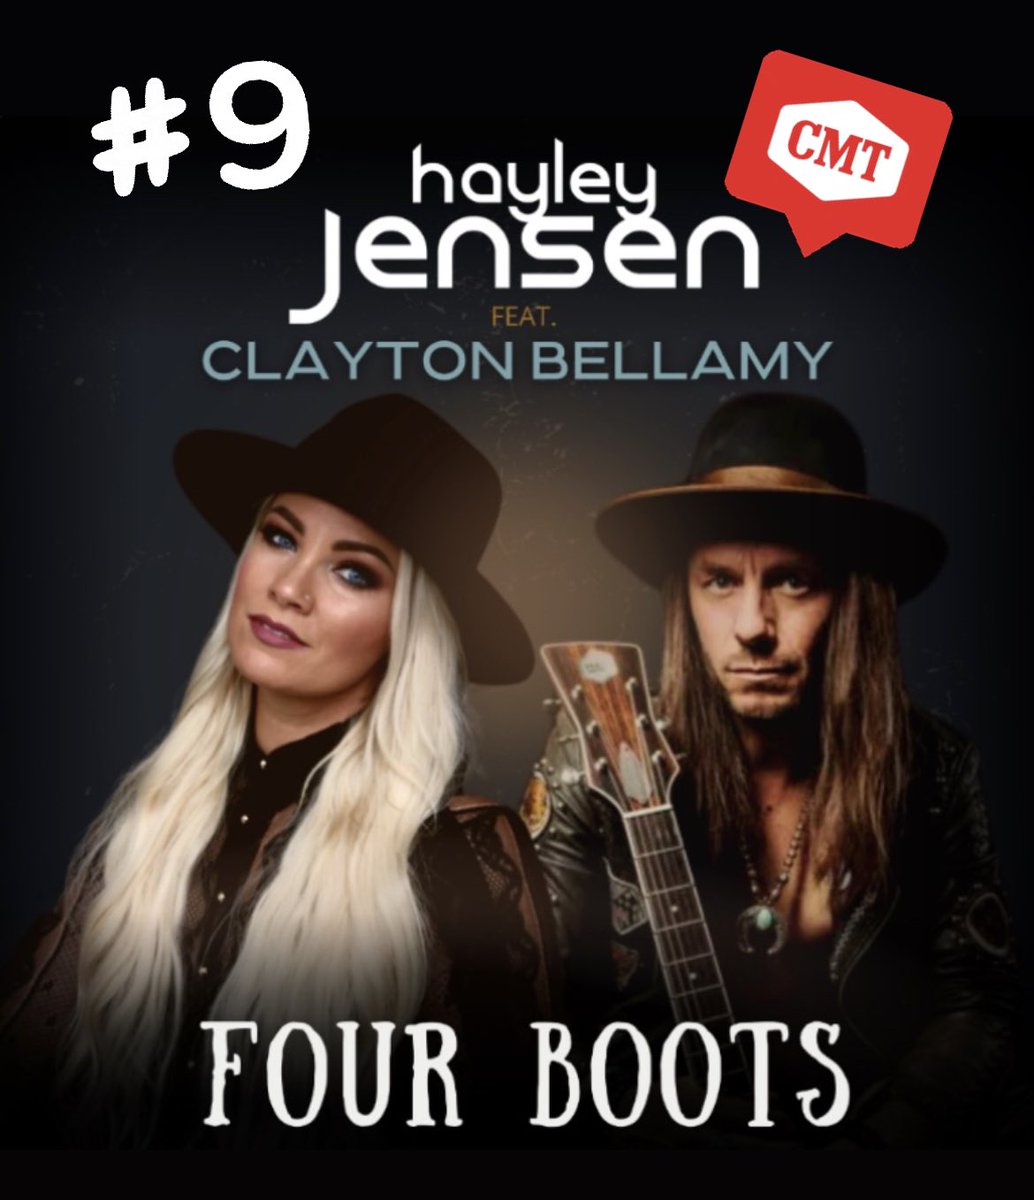 Big congrats to our #countrymusic pals @thehayleyjensen and @claytonbellamy for cracking the @AustraliaCMT Top 10!!! Produced/mixed in our tiny #Calgary music factory alongside our talented team!! 
.   .   .
#yyc #yycmusic #calgarymusic #albertamusic #musicproducer #audioengineer